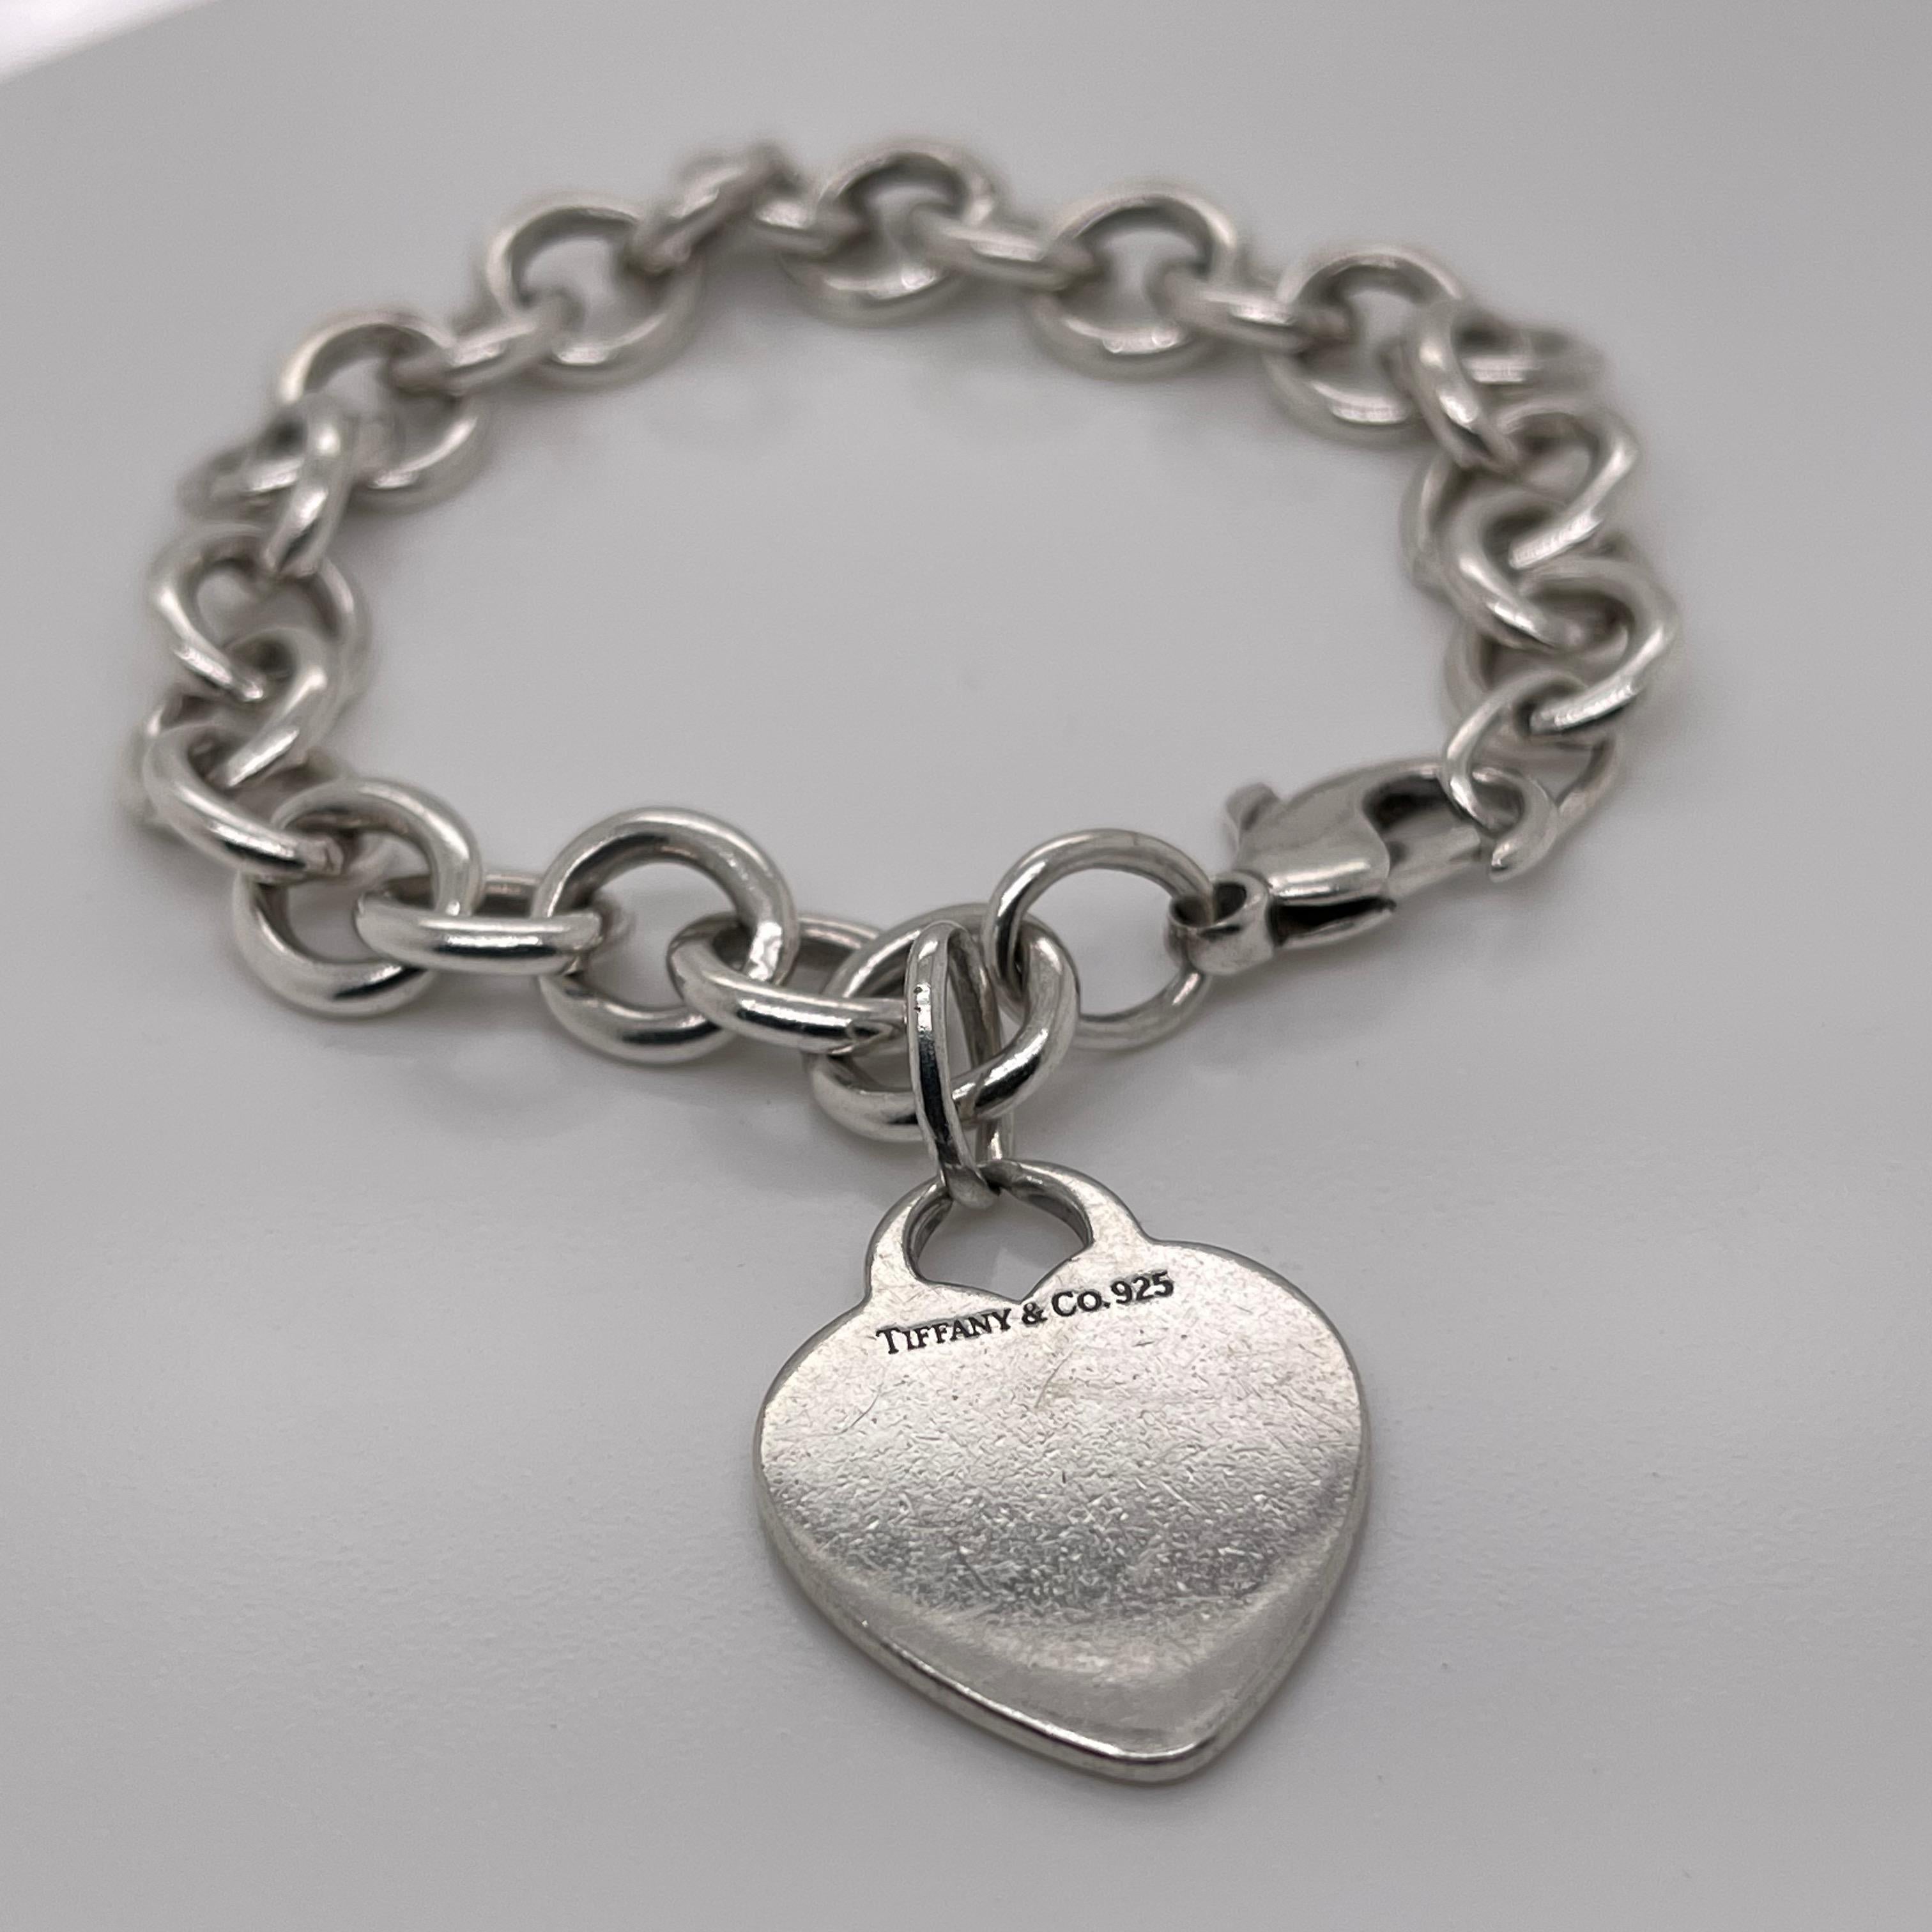 A fine Tiffany & Co. sterling silver bracelet.

With slightly oval links and a heart-shaped pendant charm.

The charm is not engraved.

Great Tiffany design!

Date:
20th Century

Overall Condition:
It is in overall good, as-pictured, used estate